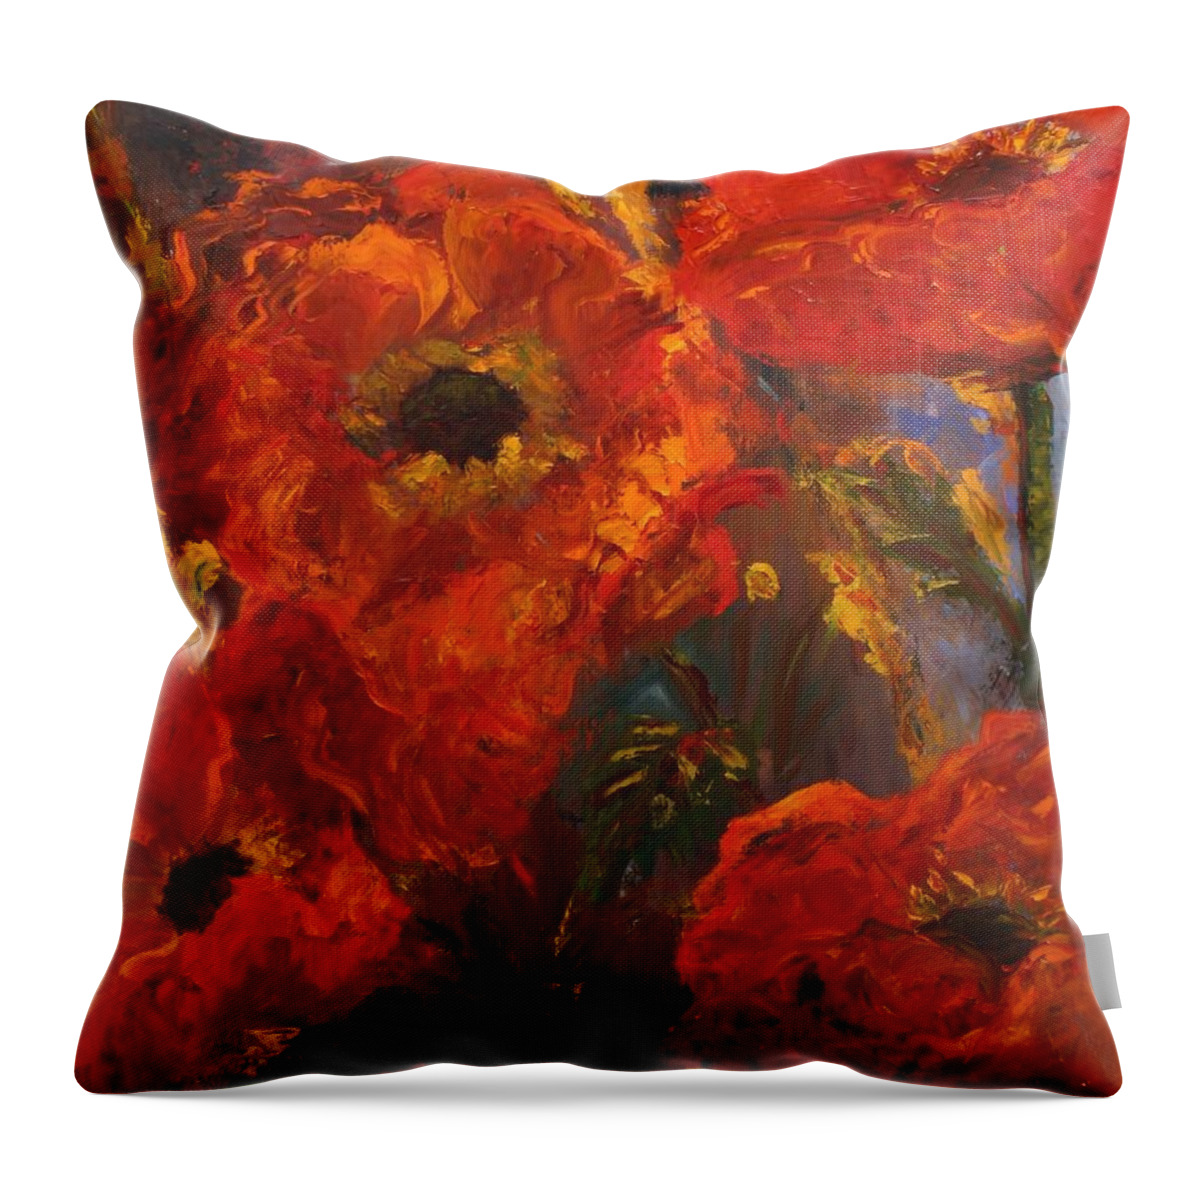 Oil Painting Throw Pillow featuring the painting Poppies by Cher Devereaux